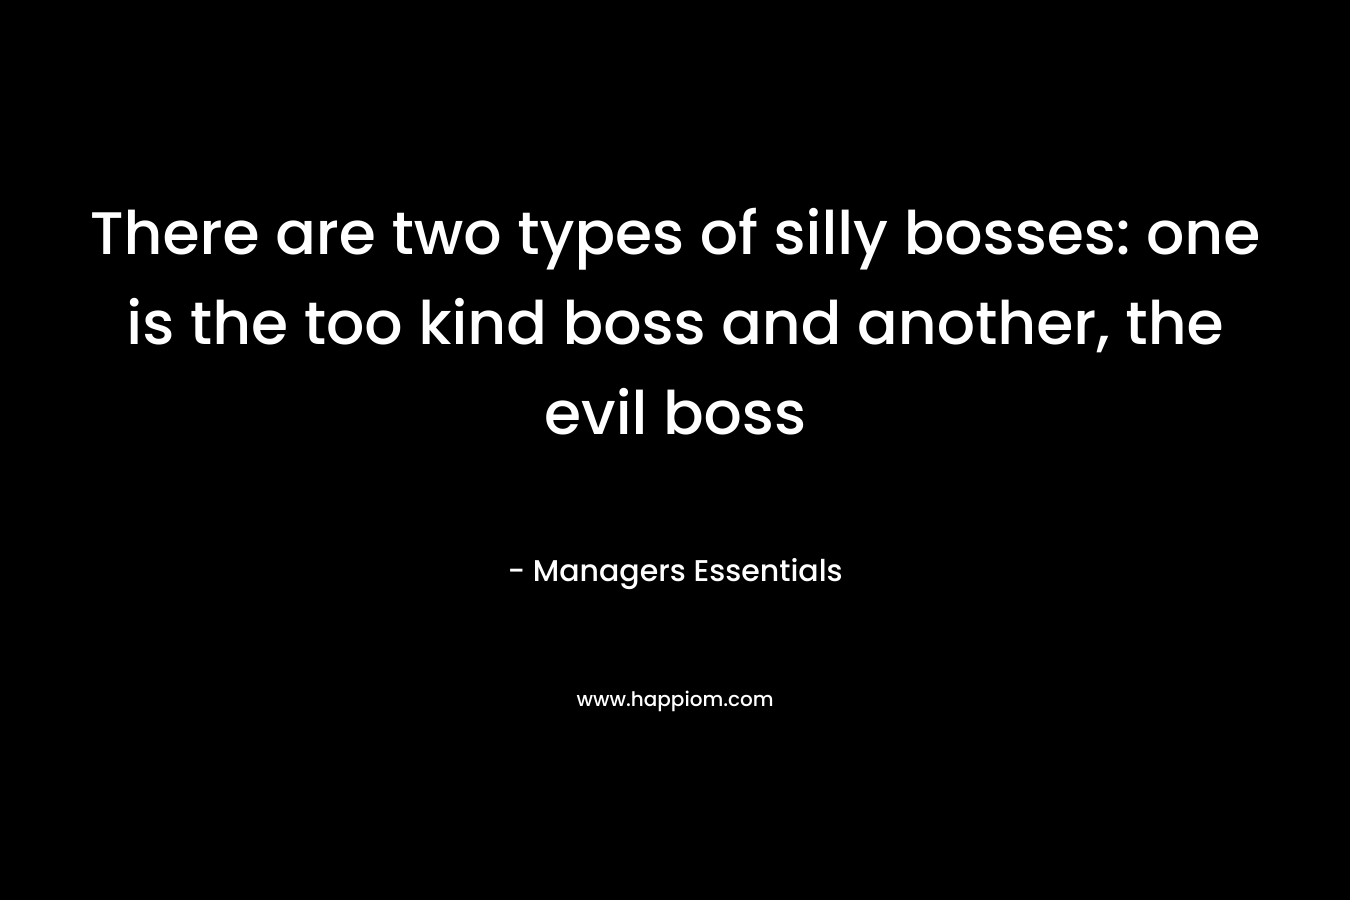 There are two types of silly bosses: one is the too kind boss and another, the evil boss – Managers Essentials